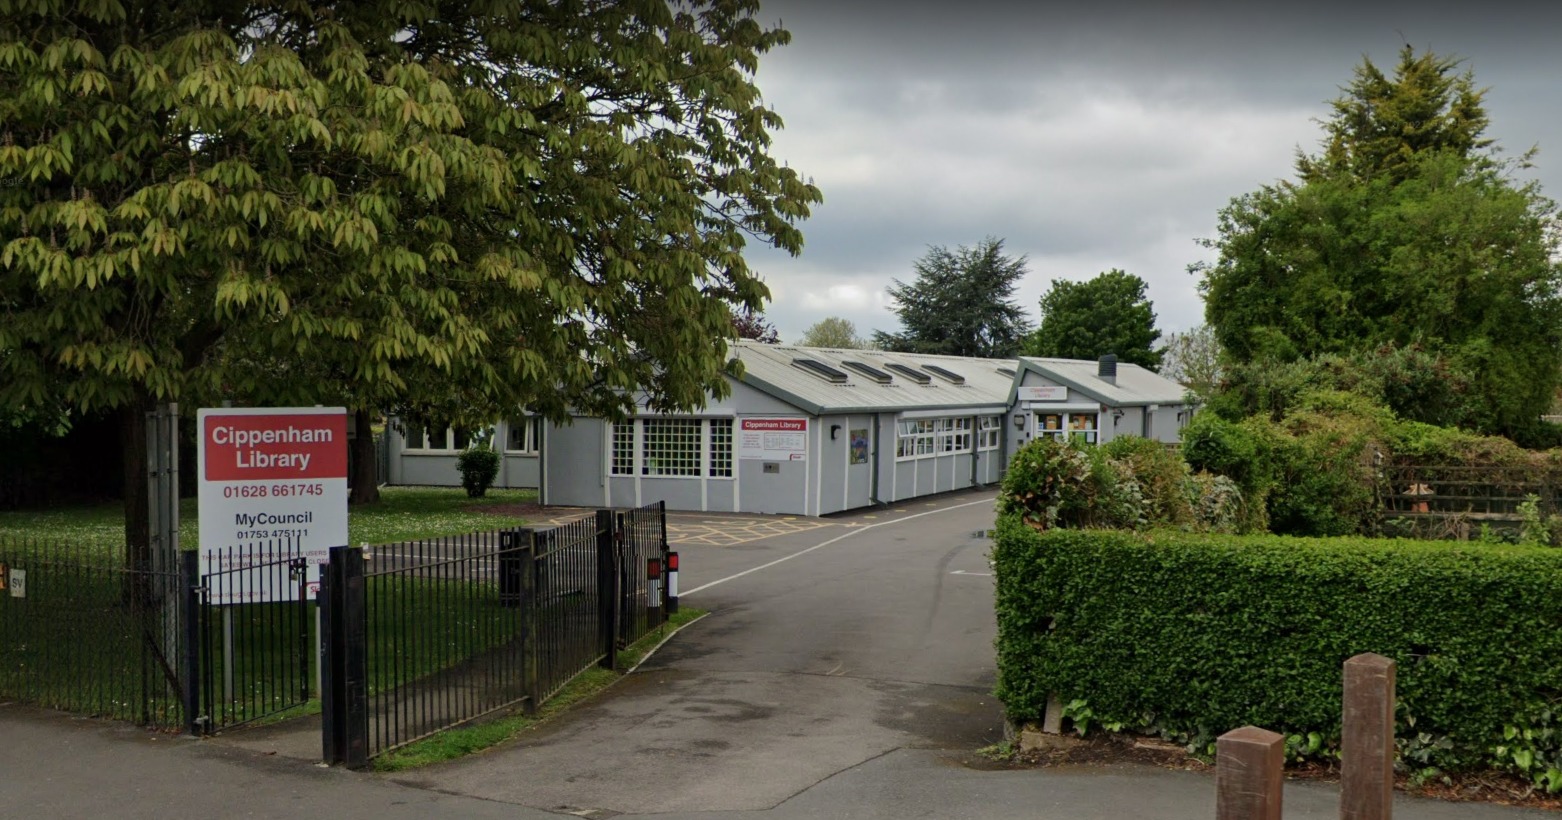 Cippenham Library could close in a proposed series of cuts